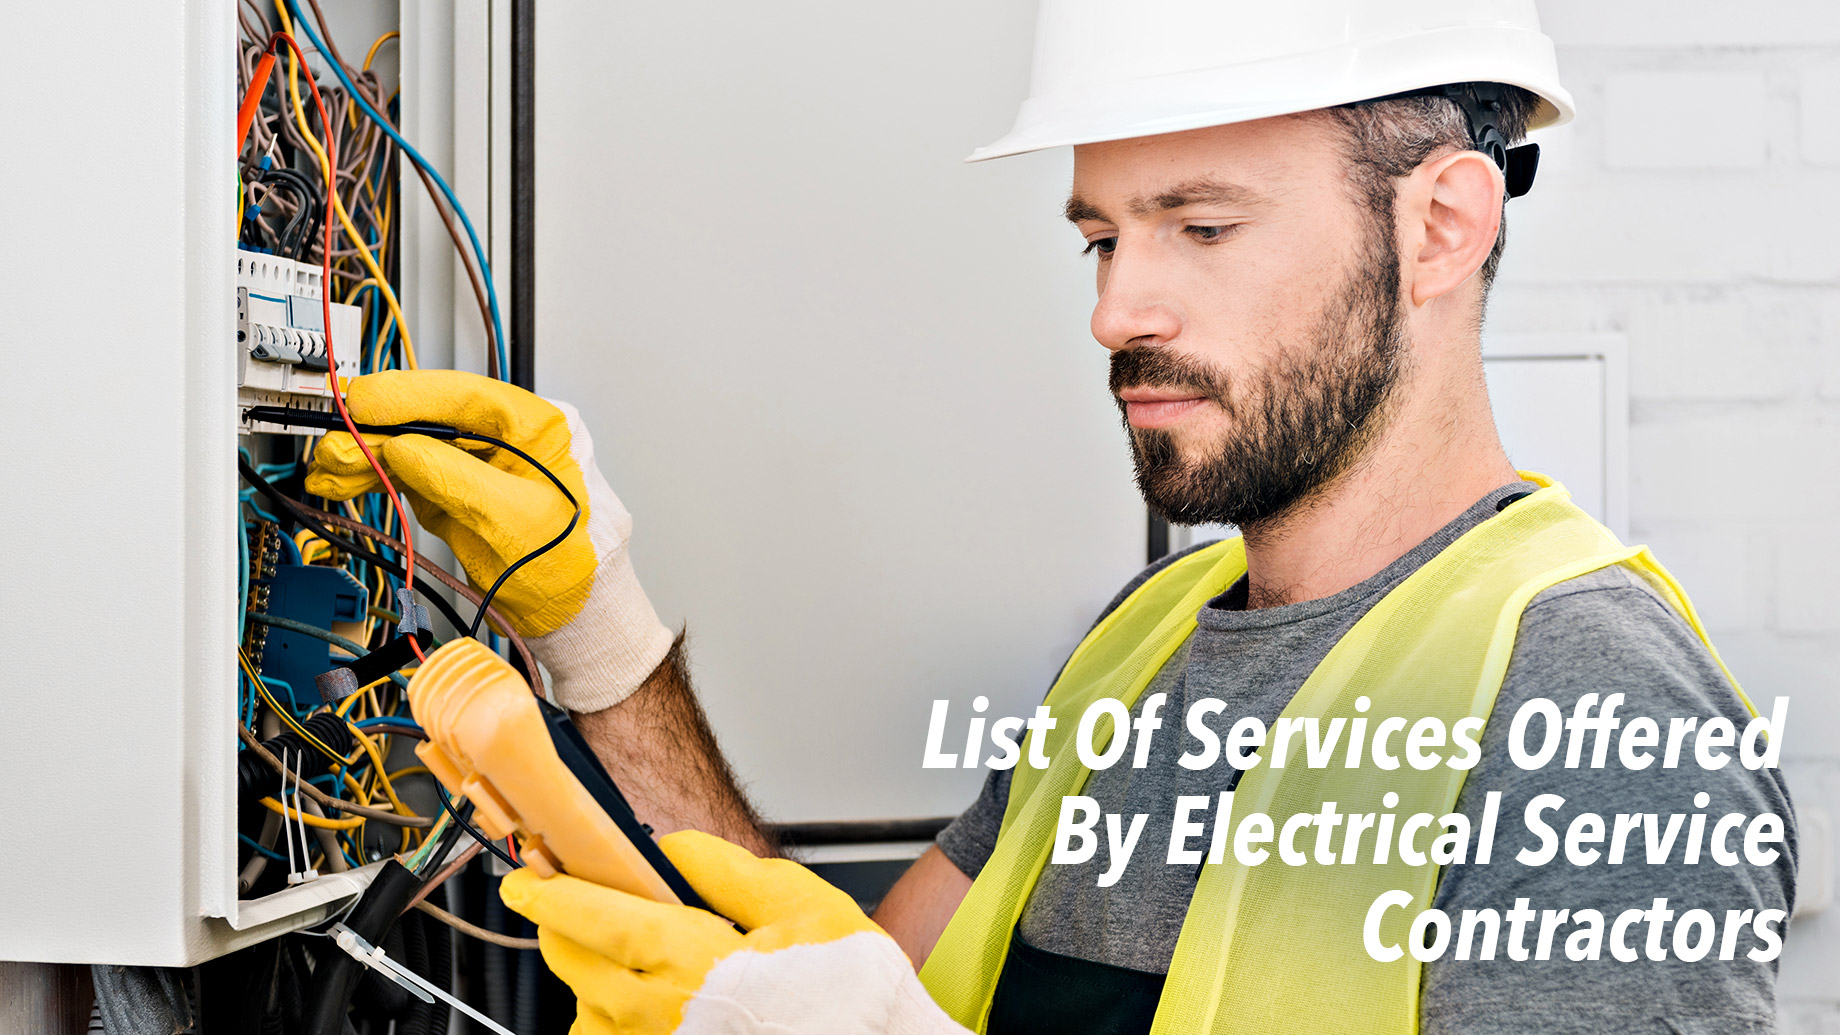 List Of Services Offered By Electrical Service Contractors